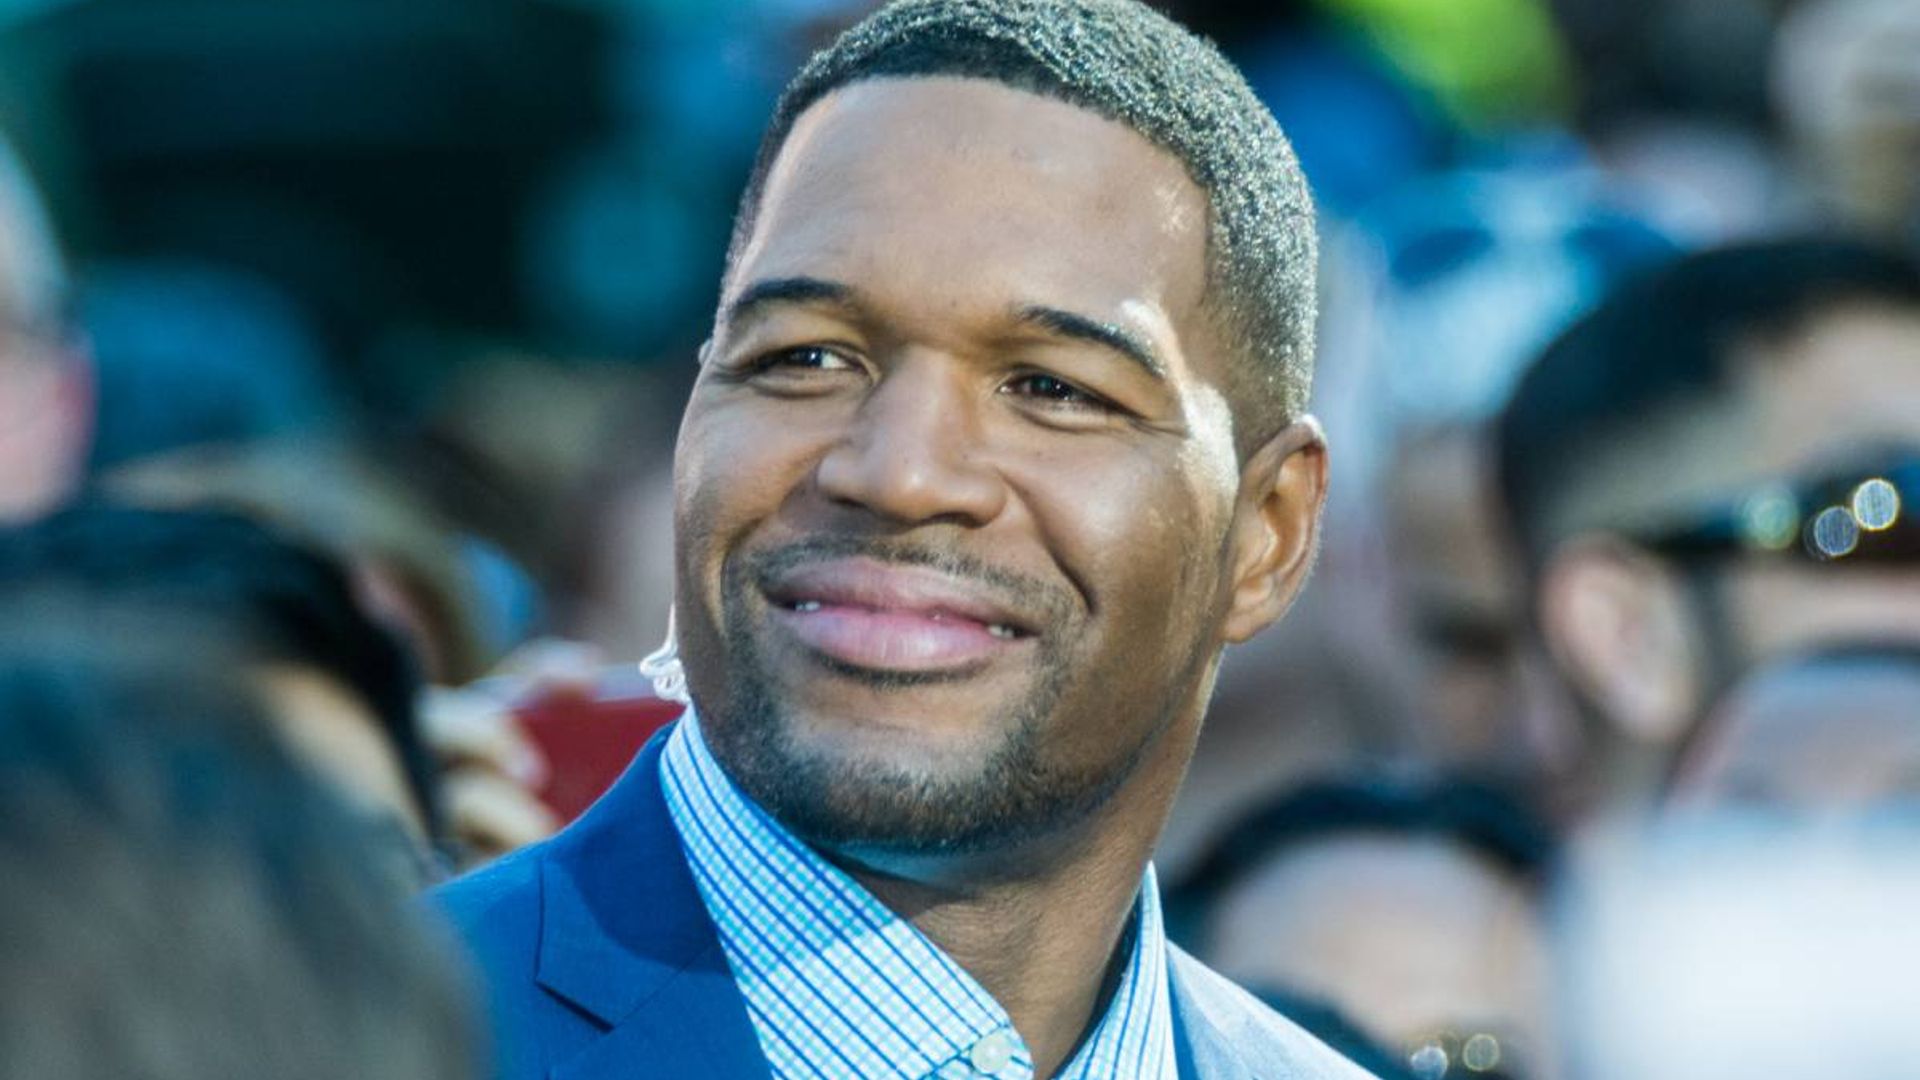 GMA's Michael Strahan divides fans with latest post as star asks for help